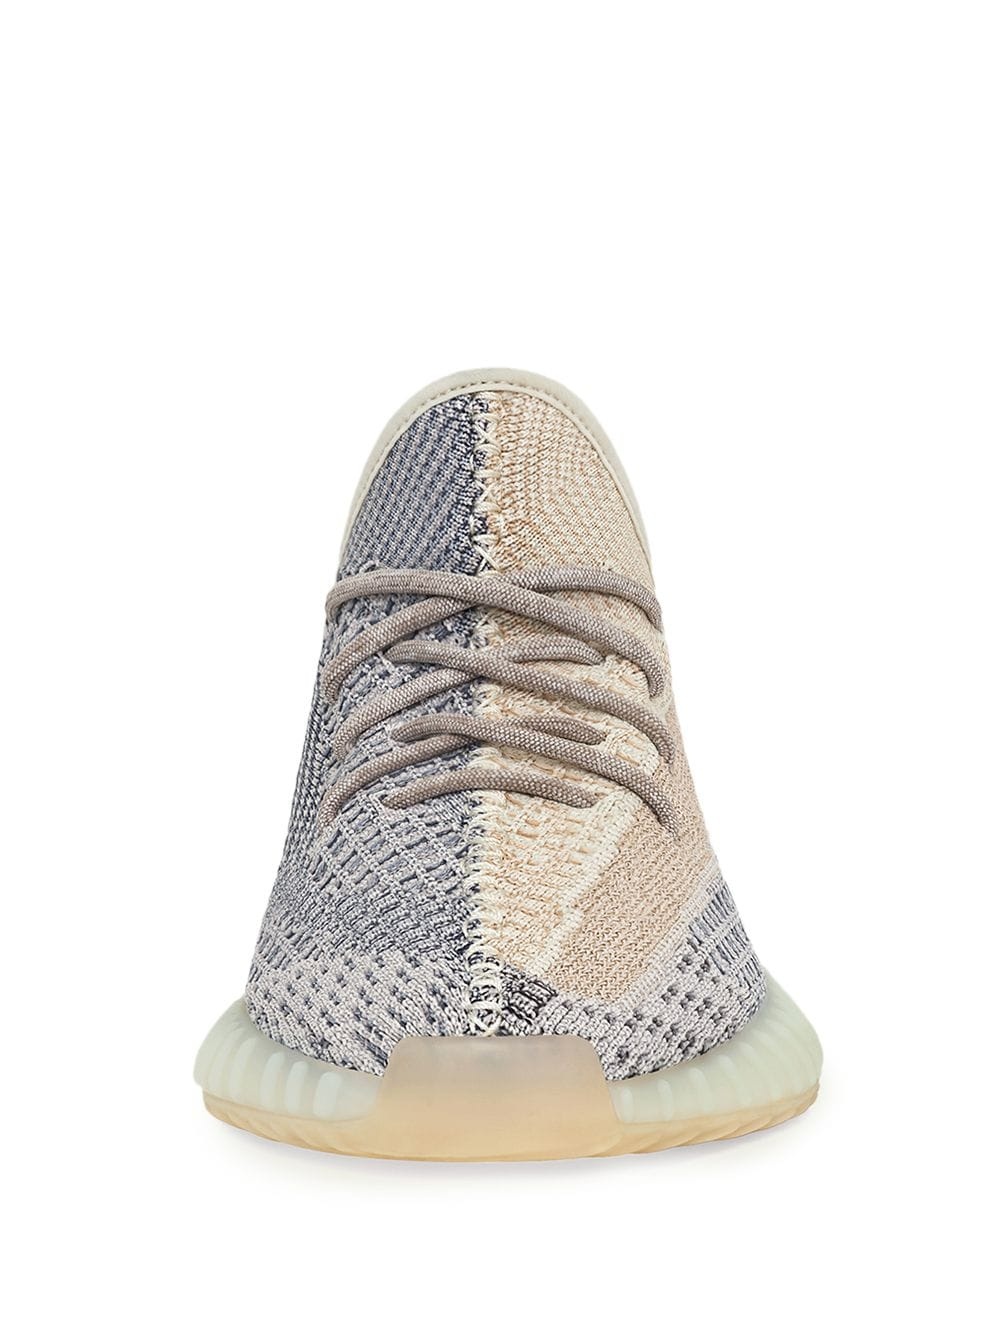 Boost 350 V2 Ash Pearl sneakers - 2